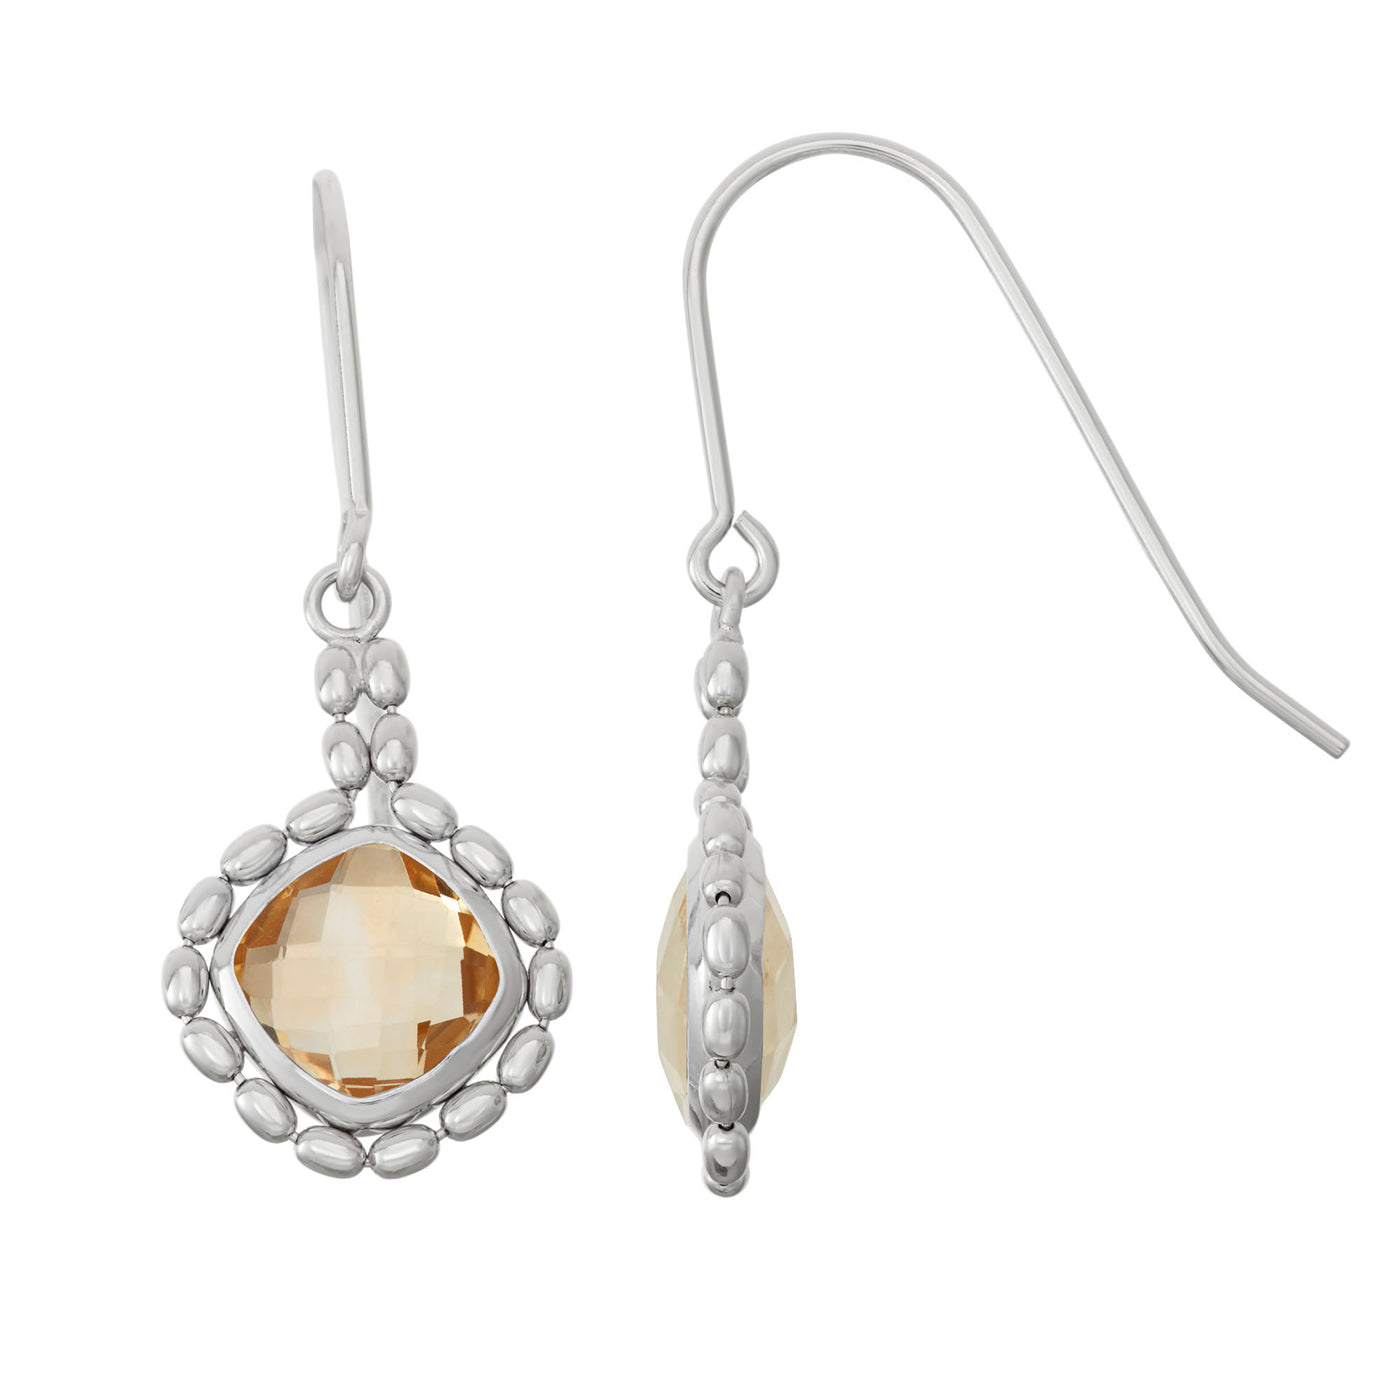 Rebecca Sloane Silver Beads Earring With Citrine Square Stone